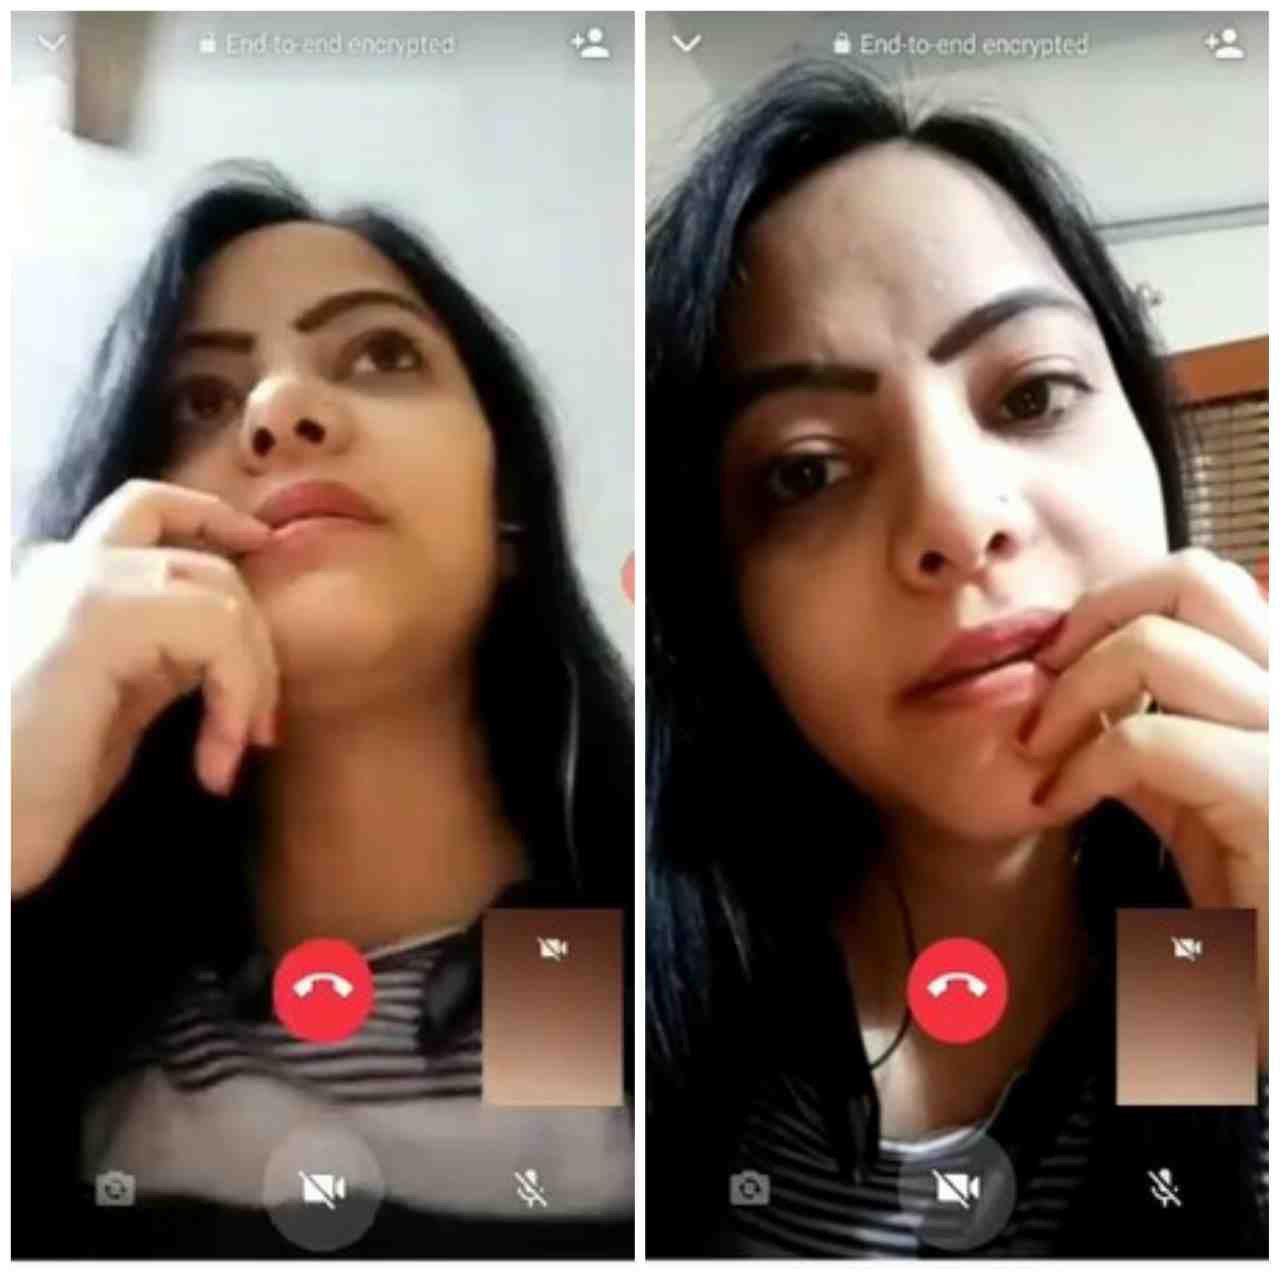 Video call with bf